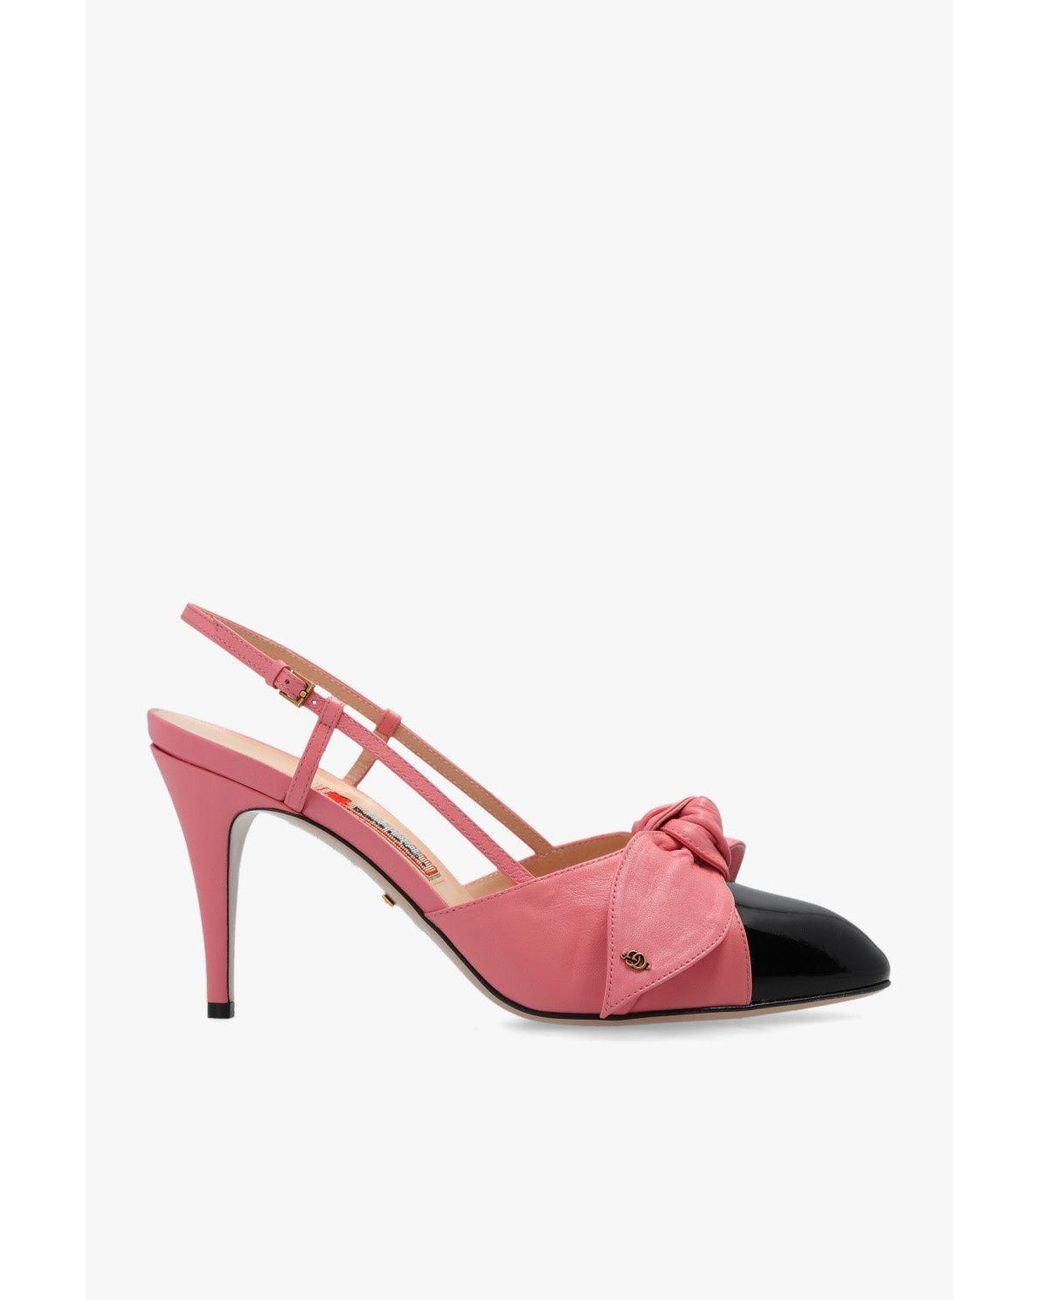 Gucci Pink Pumps With Bow | Lyst